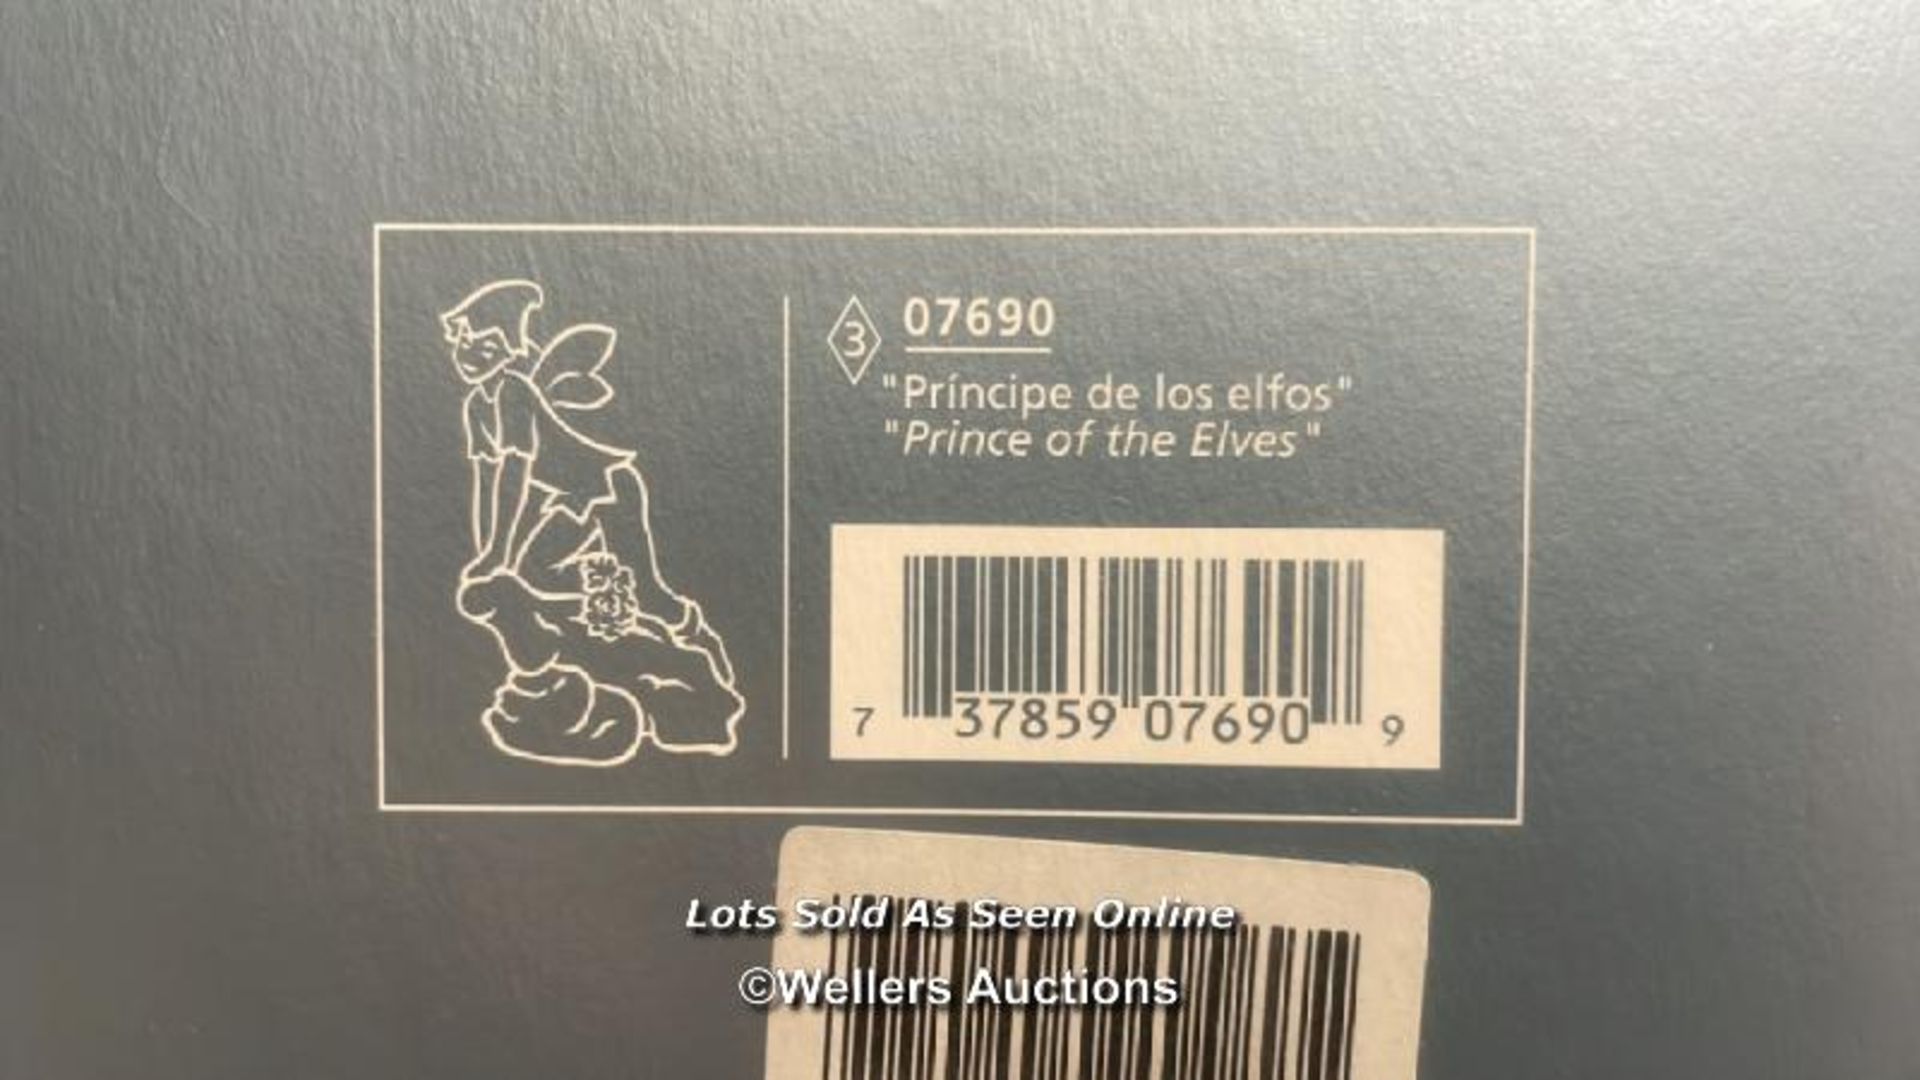 LLADRO PRIVILEGE COLLECTION "PRINCE OF THE ELVES" NO.07690, BOXED - Image 9 of 9